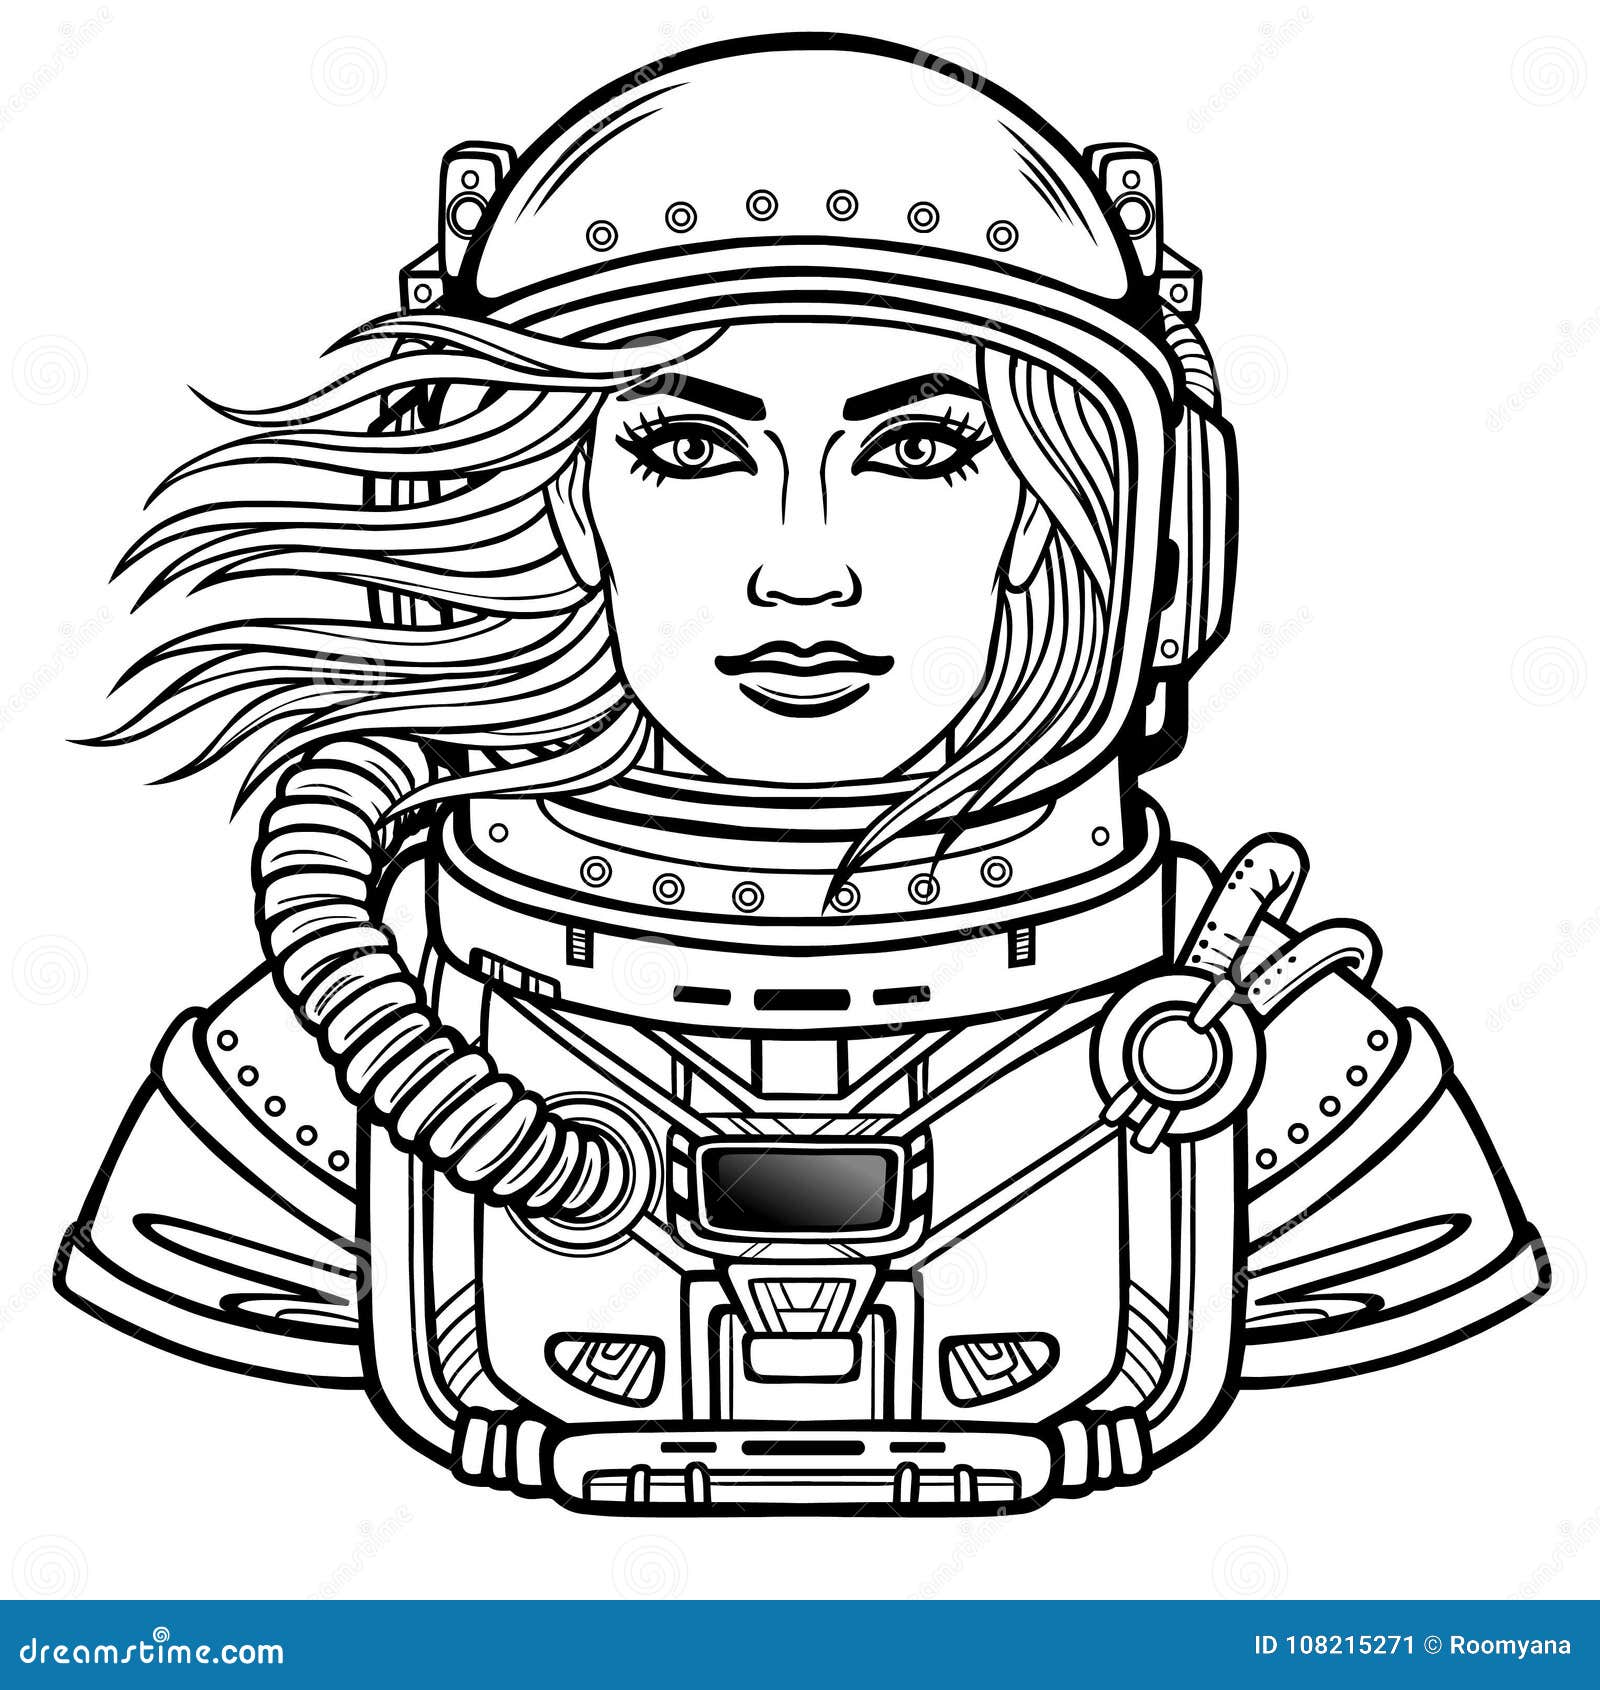 animation portrait of the young attractive woman astronaut in a space suit. helmet is open, hair flutter.